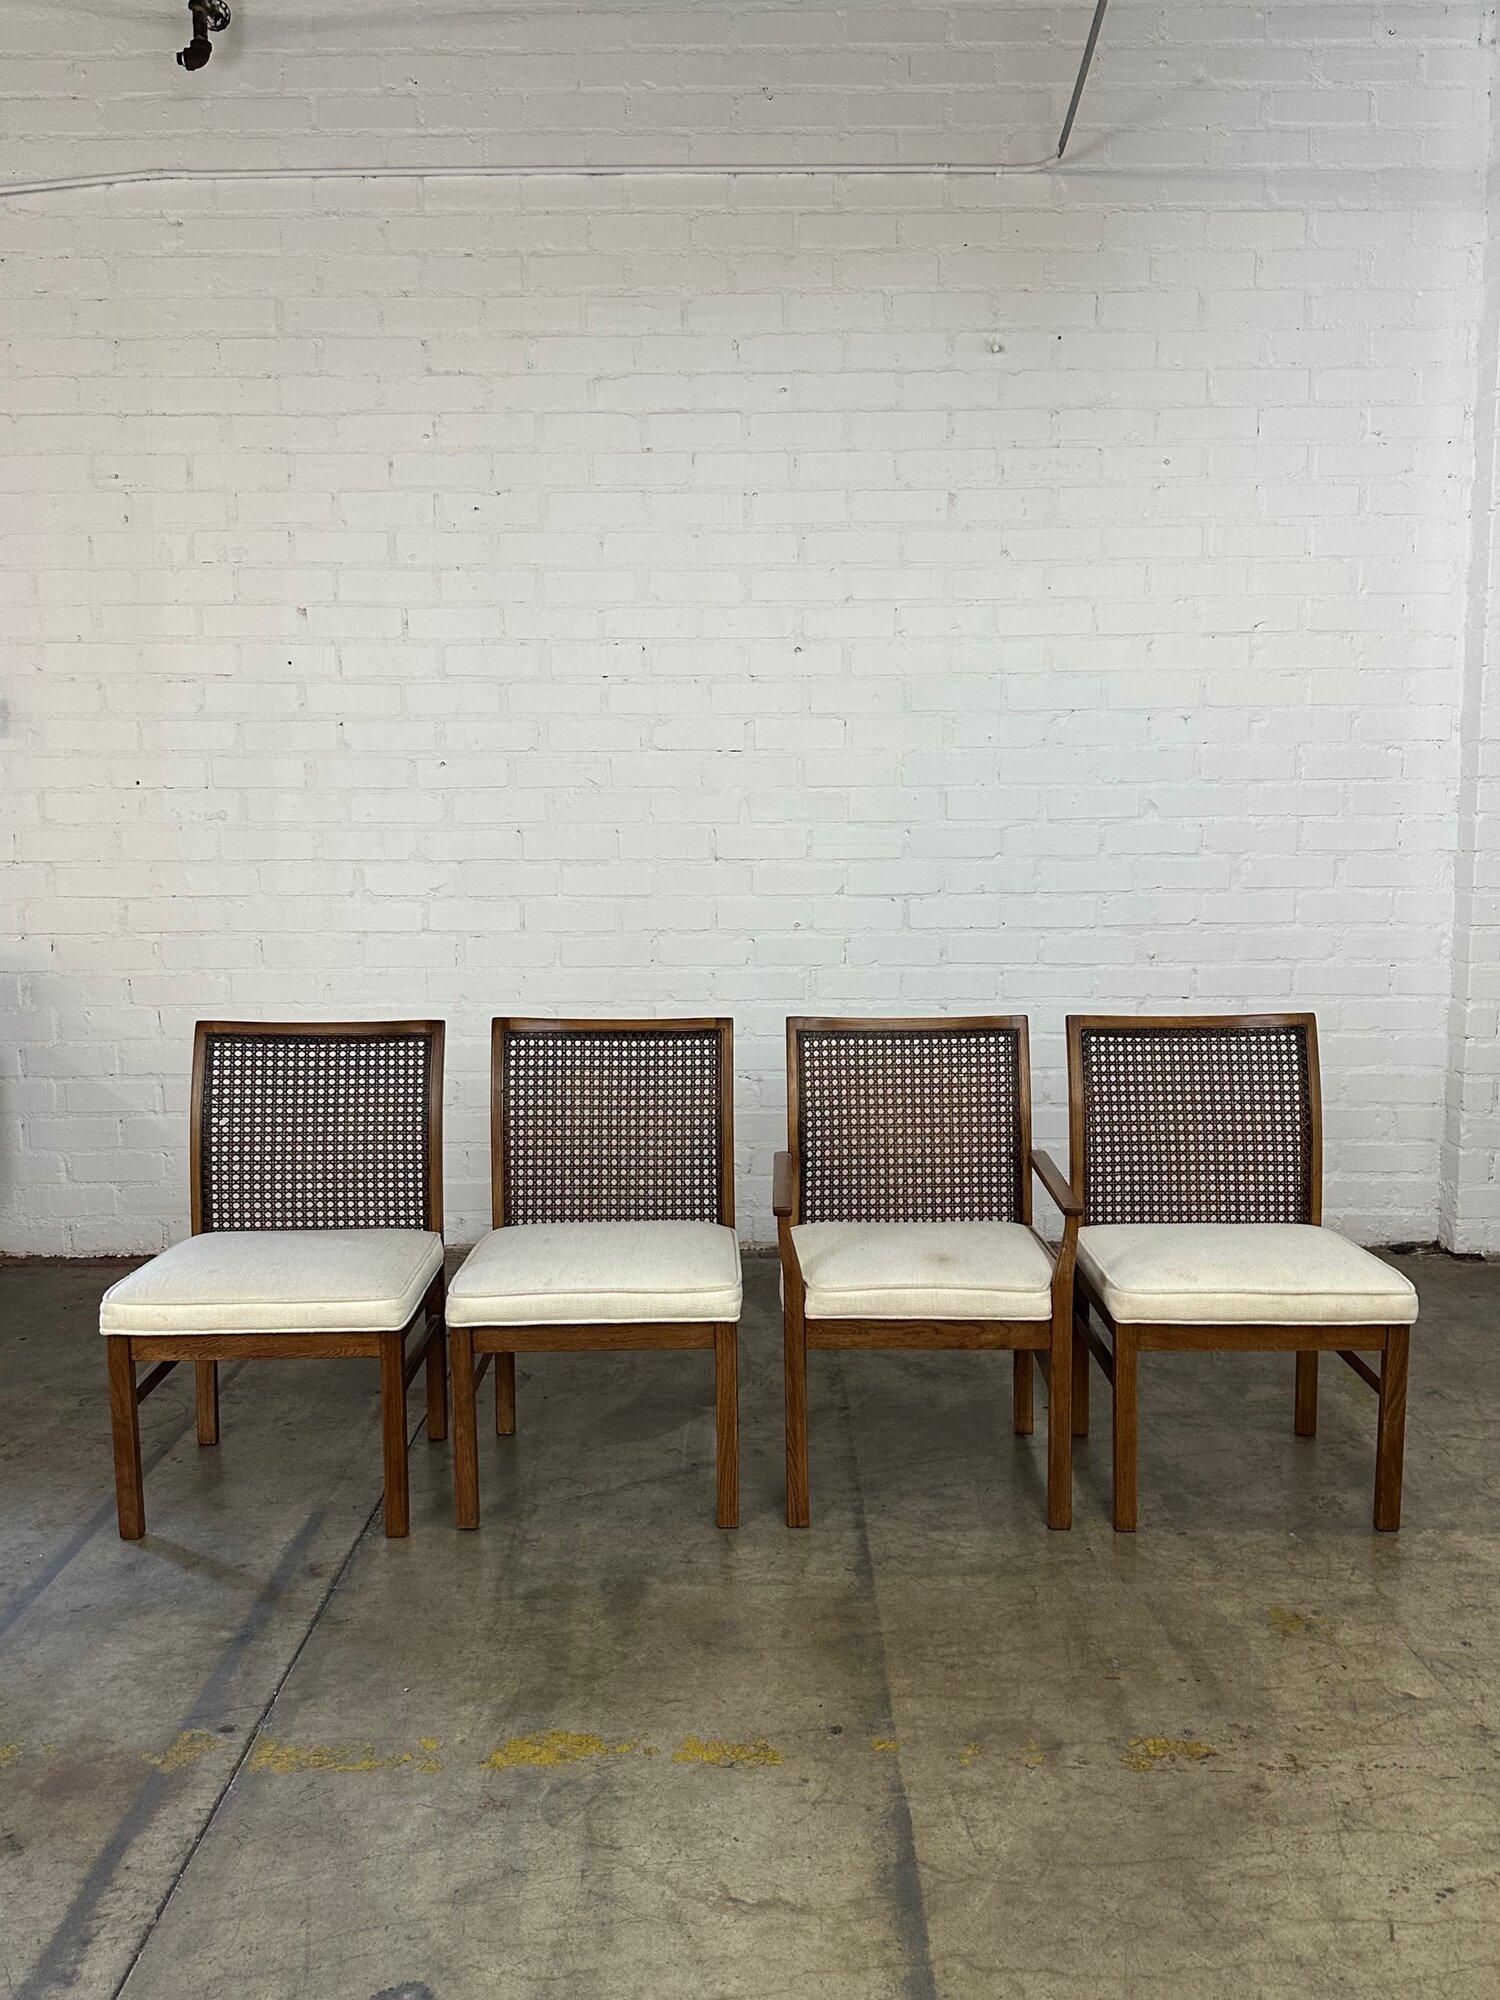 W21 D21 H35 SW20.5 SD18 SH18

with arm W22 D22 H35 SW17 SD17.5 SH18 AH23

Vintage dining chairs by Lane in great condition. Frames have been fully restored and are structurally sound and sturdy. Chair do have original upholstery in usable condition